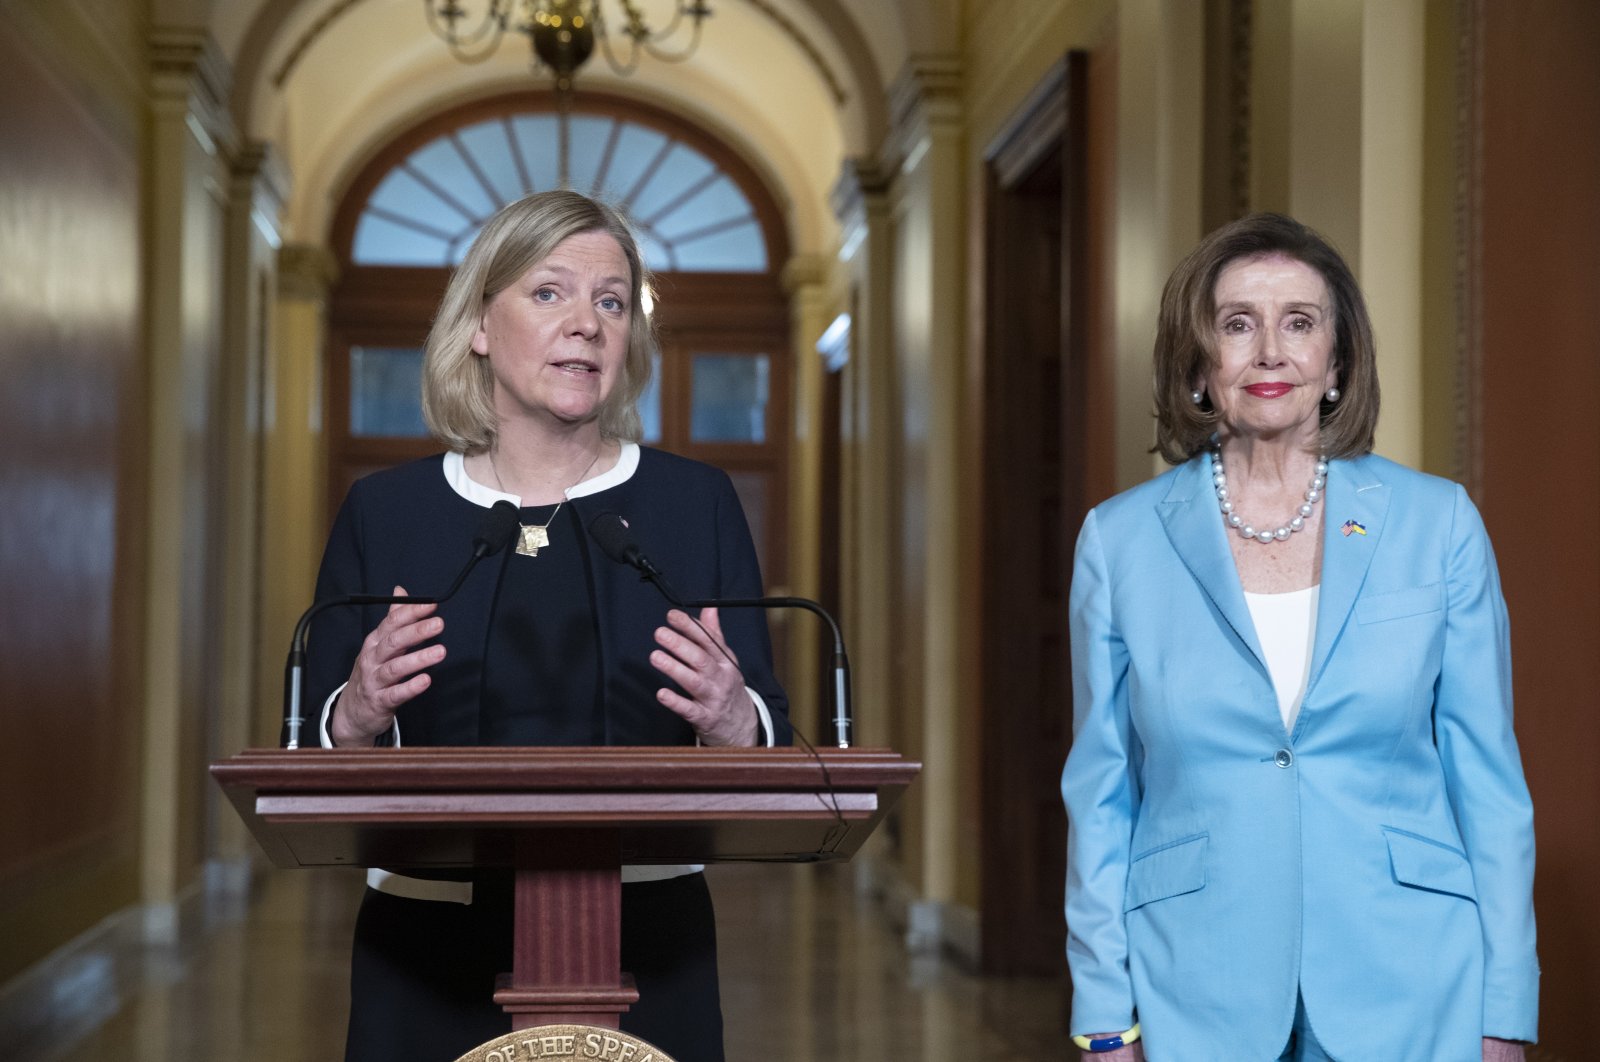 US Speaker of the House Nancy Pelosi (R) listens to Prime Minister of Sweden Magdalena Andersson (L) deliver remarks outside Pelosi&#039;s office before their meeting on Capitol Hill in Washington, D.C., U.S., 19 May 2022. (EPA)